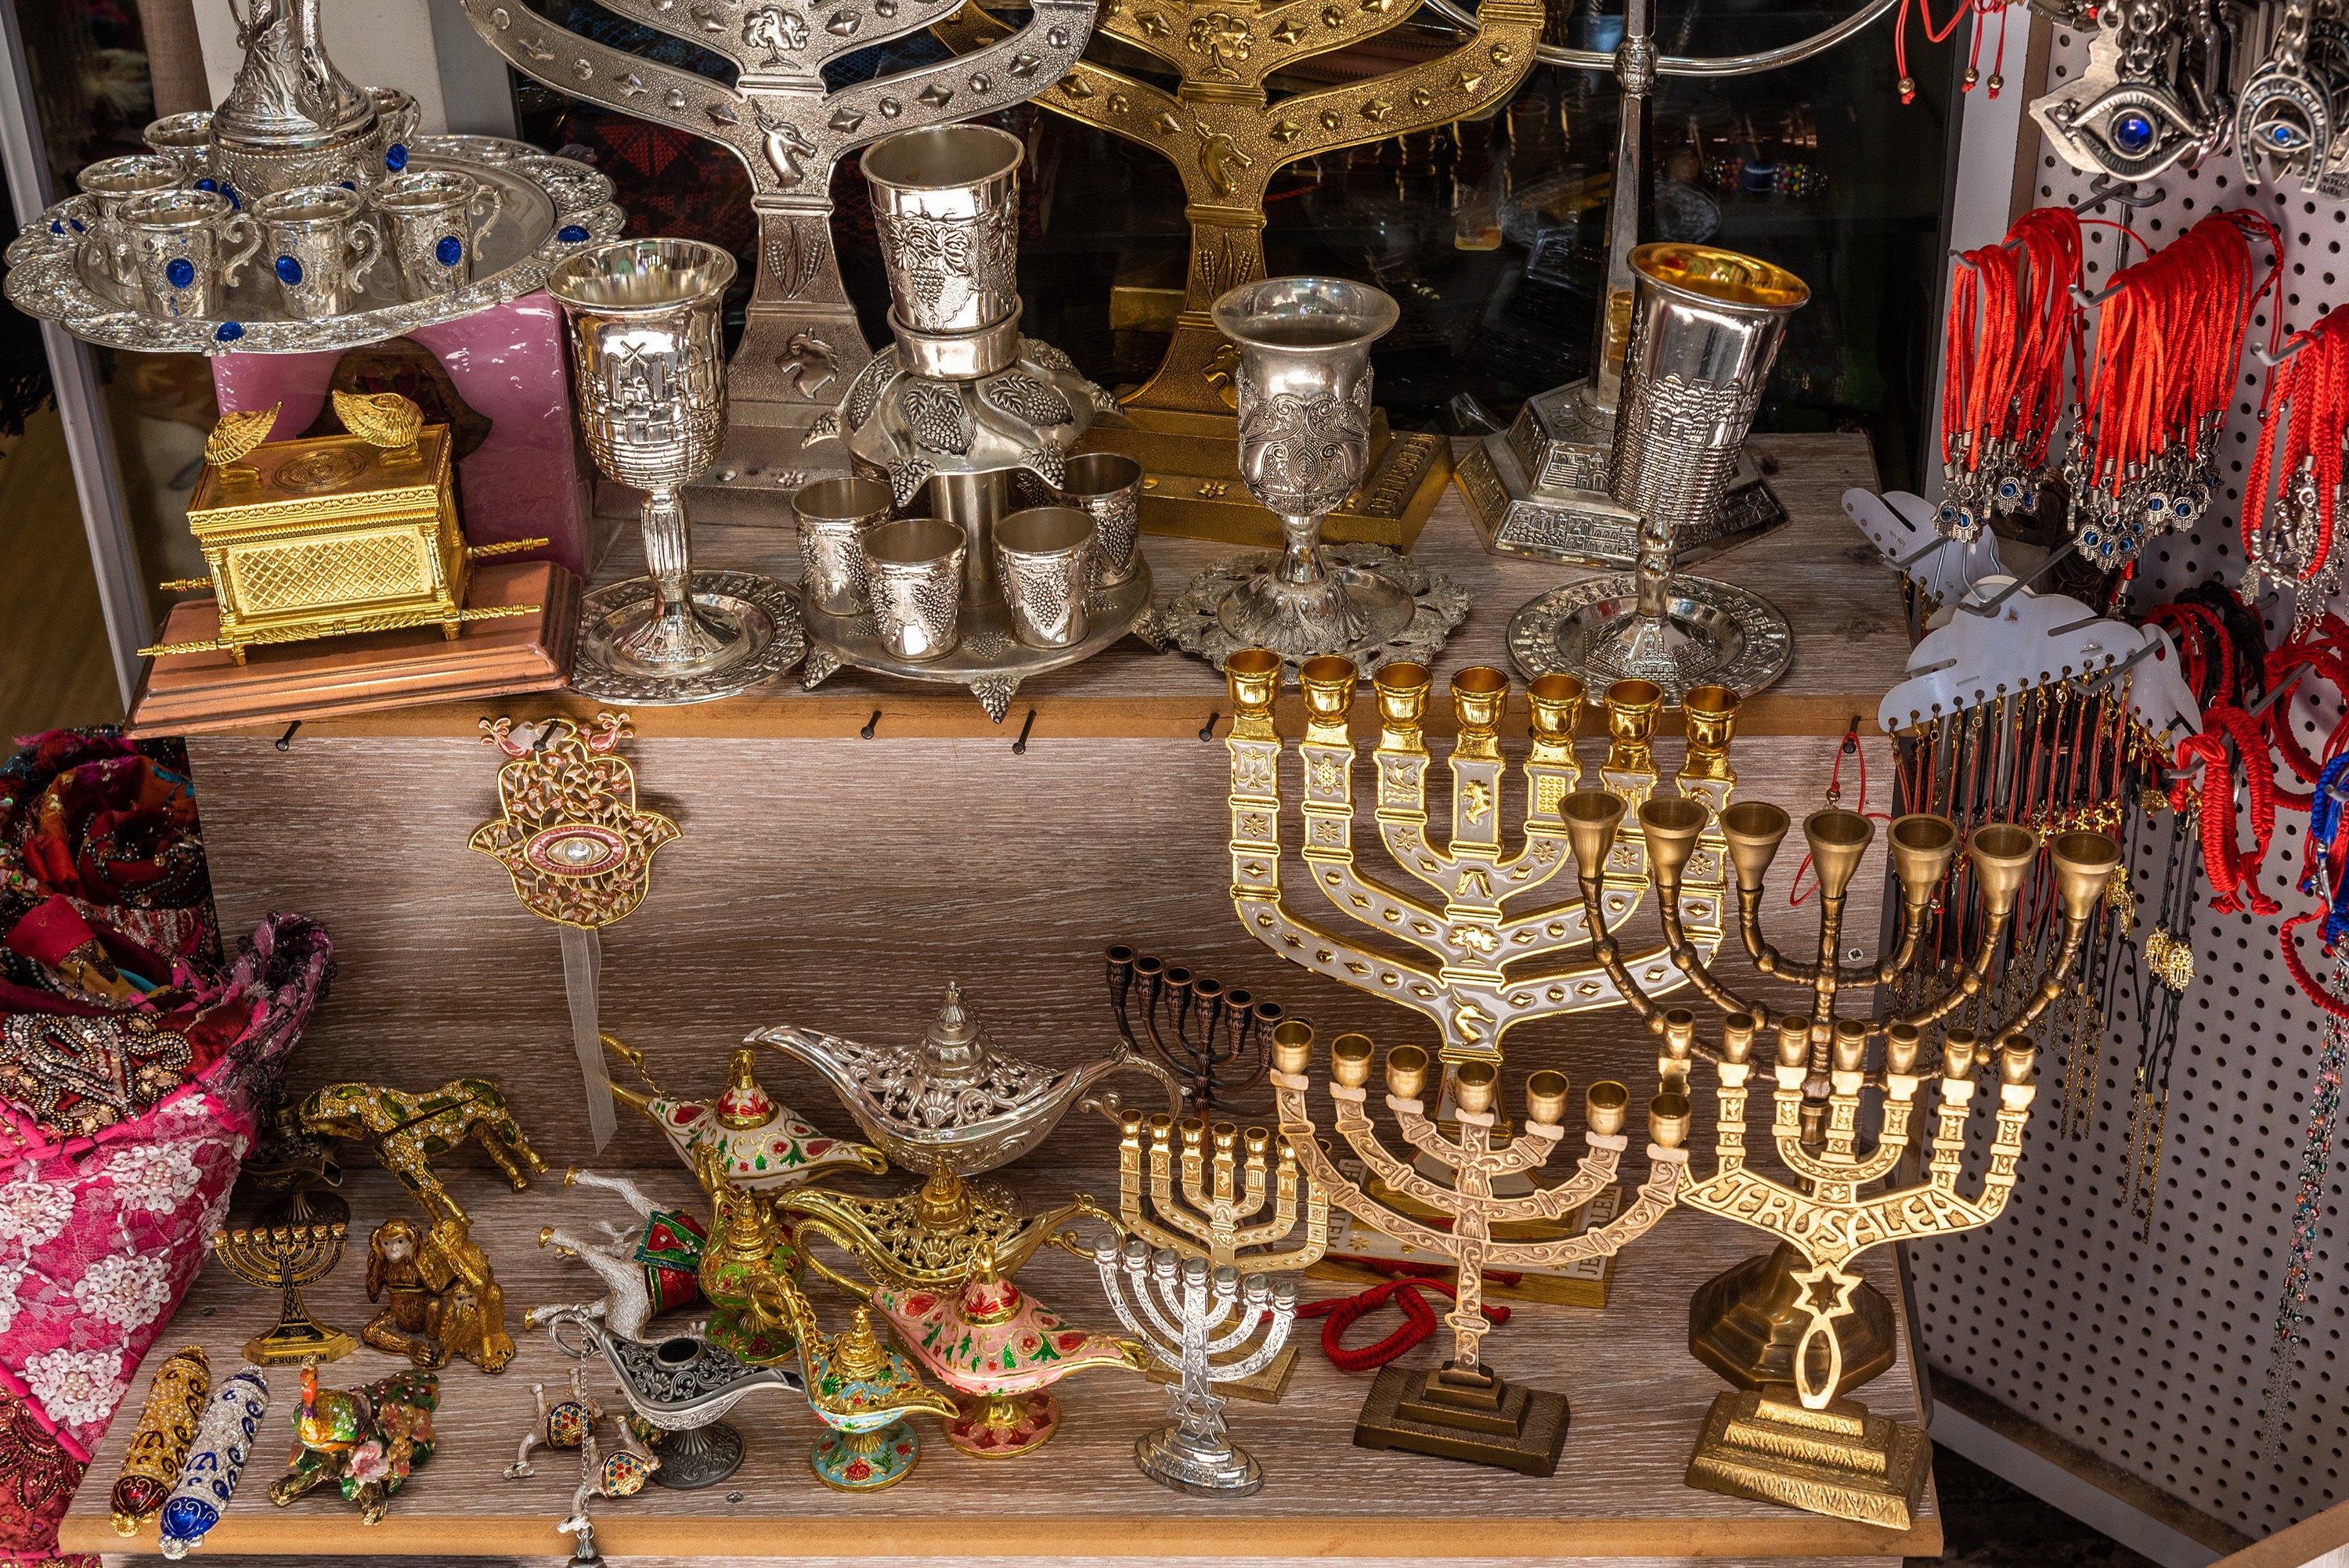 Menorahs and lanps and a tea set displayed on tables at an outdoor bazaar